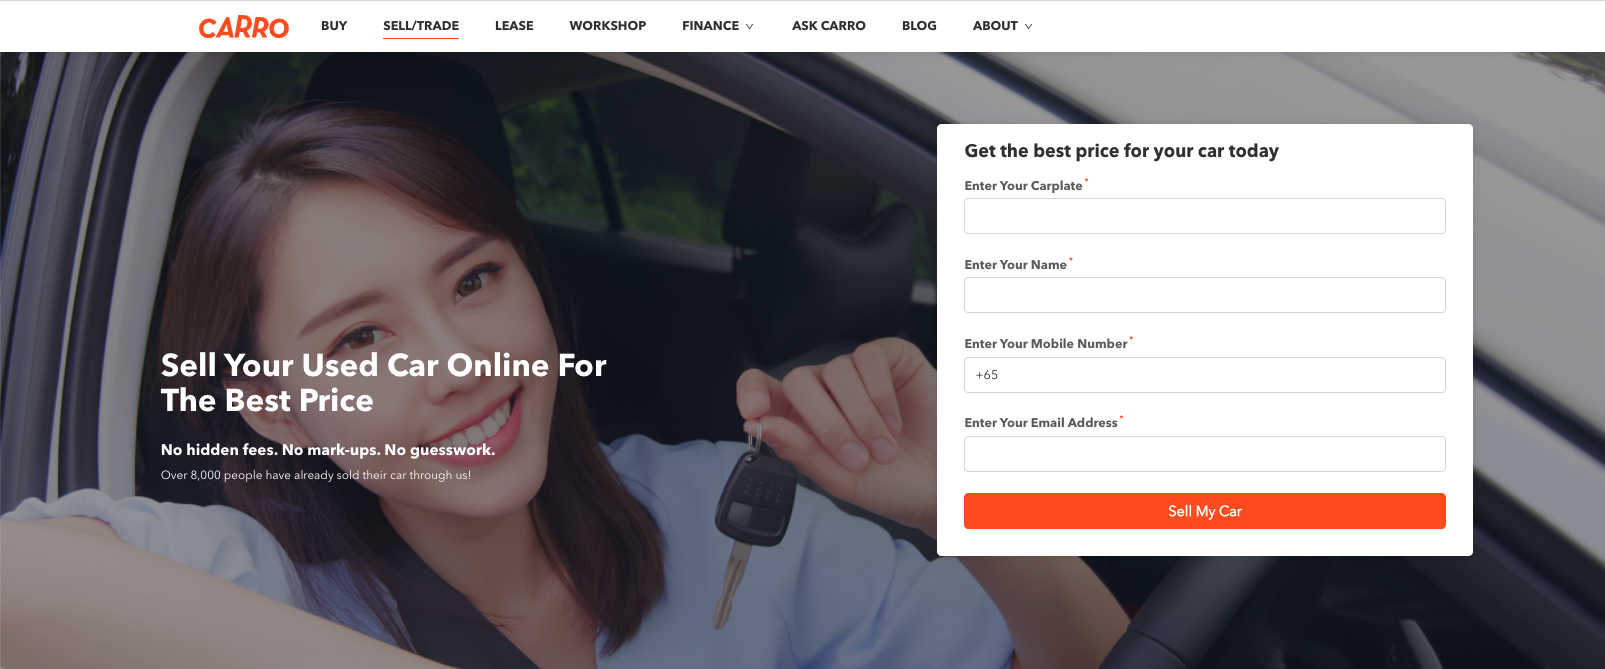 car selling singapore better price